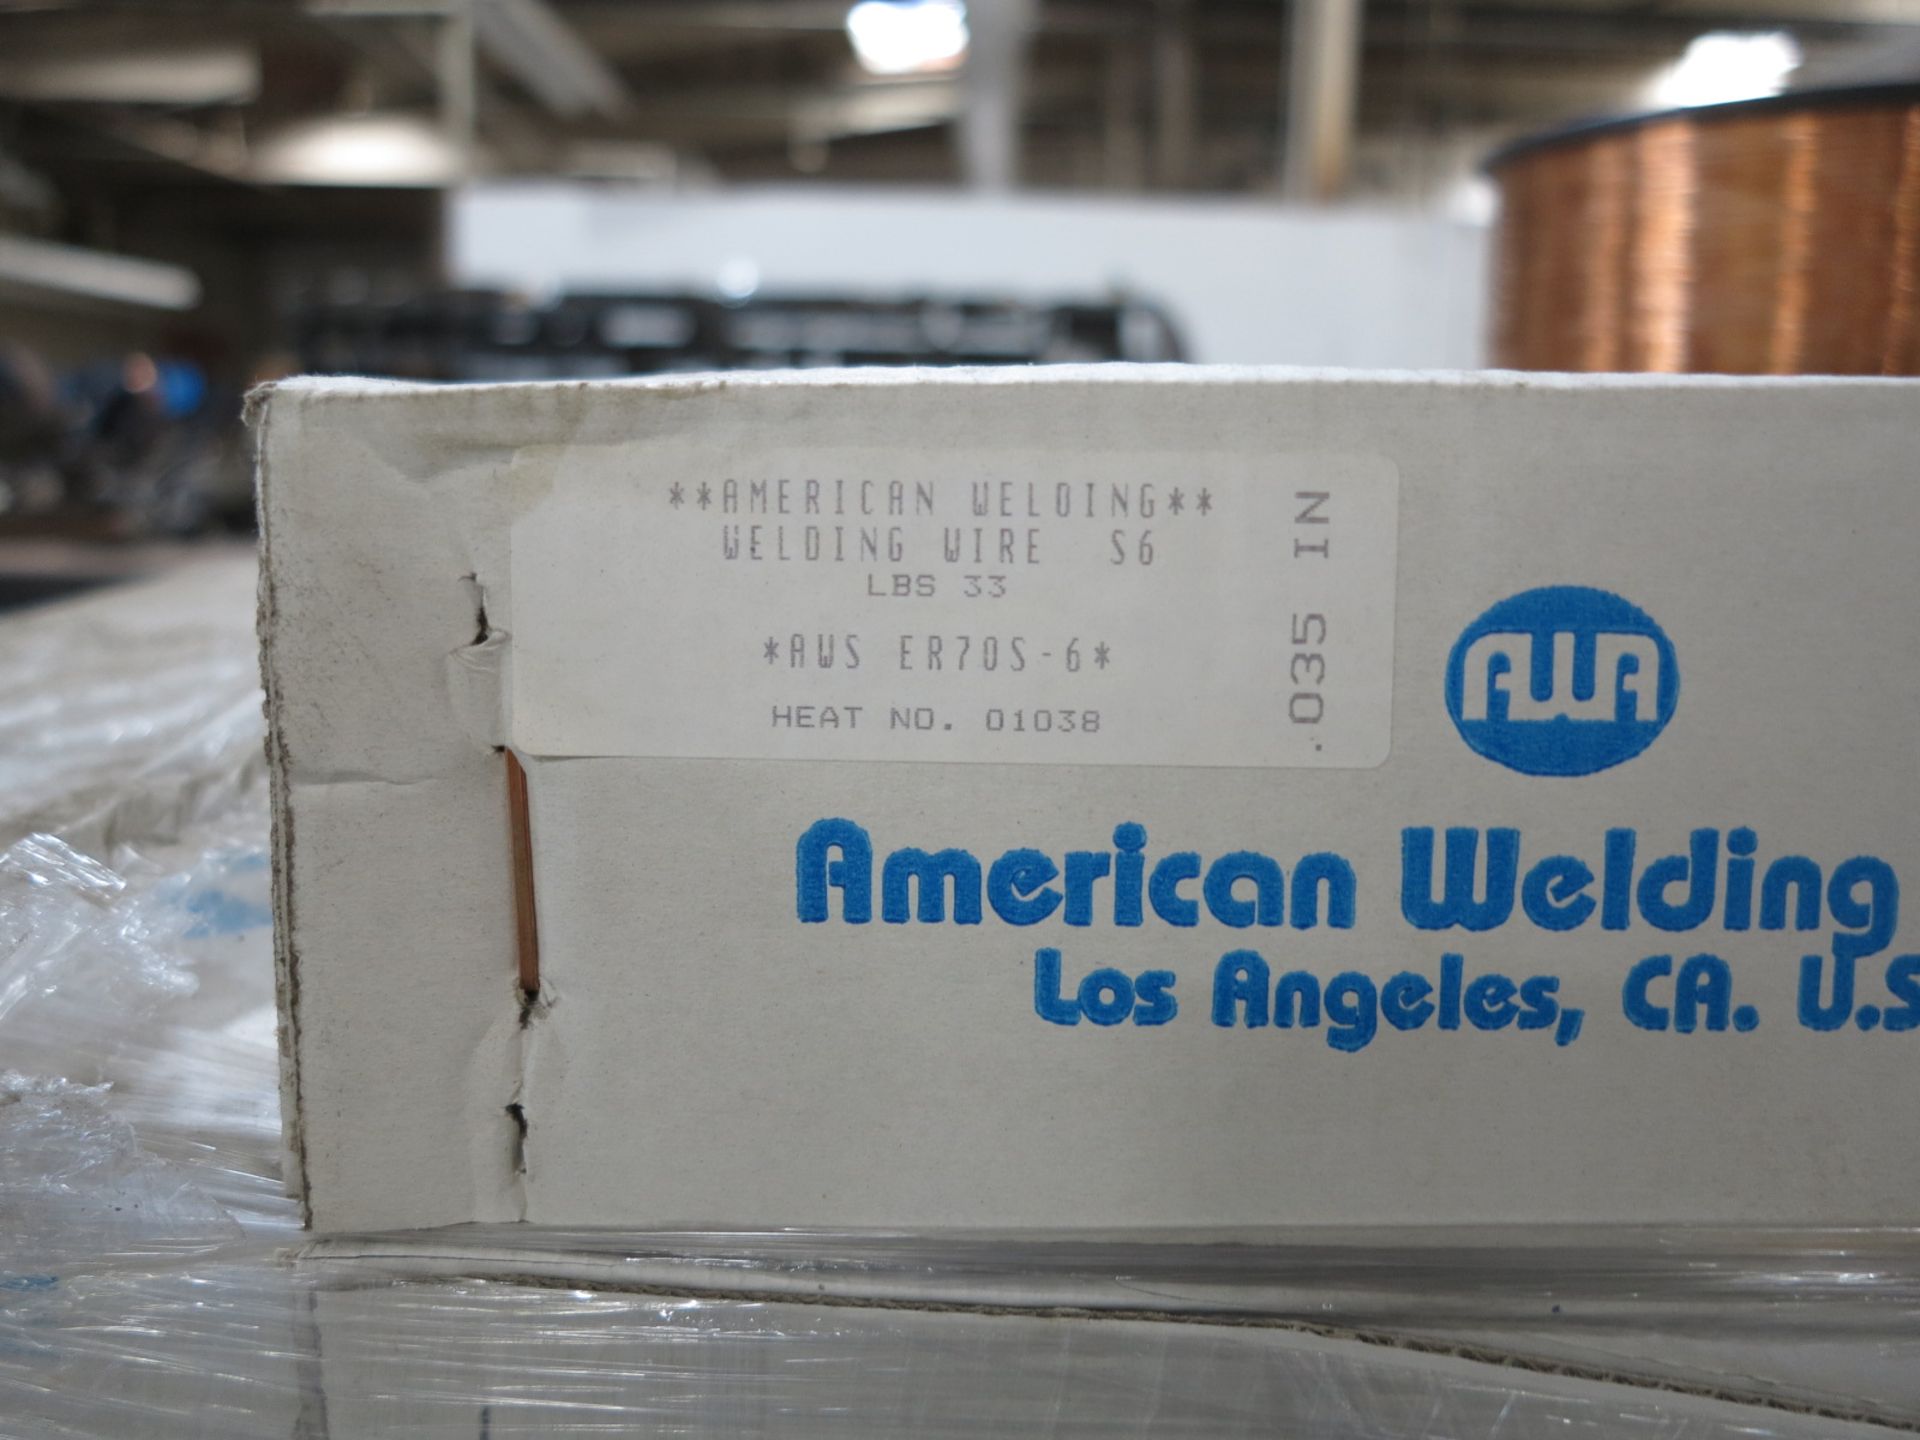 LOT - PALLET OF AMERICAN WELDING WIRE, S6, DIA. .035", 100 BOXES - Image 2 of 2